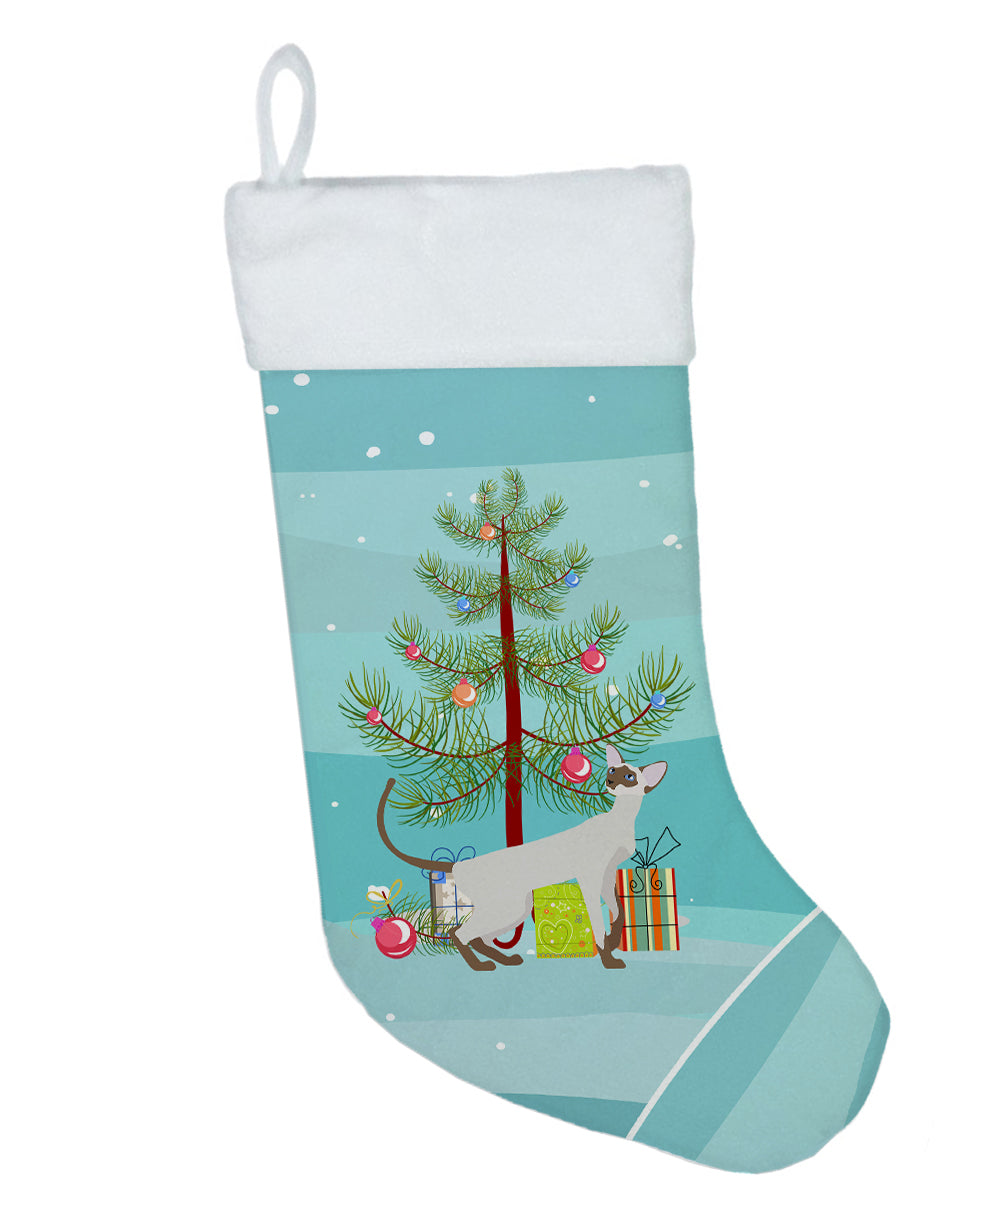 Colorpoint Shorthair Cat Merry Christmas Christmas Stocking